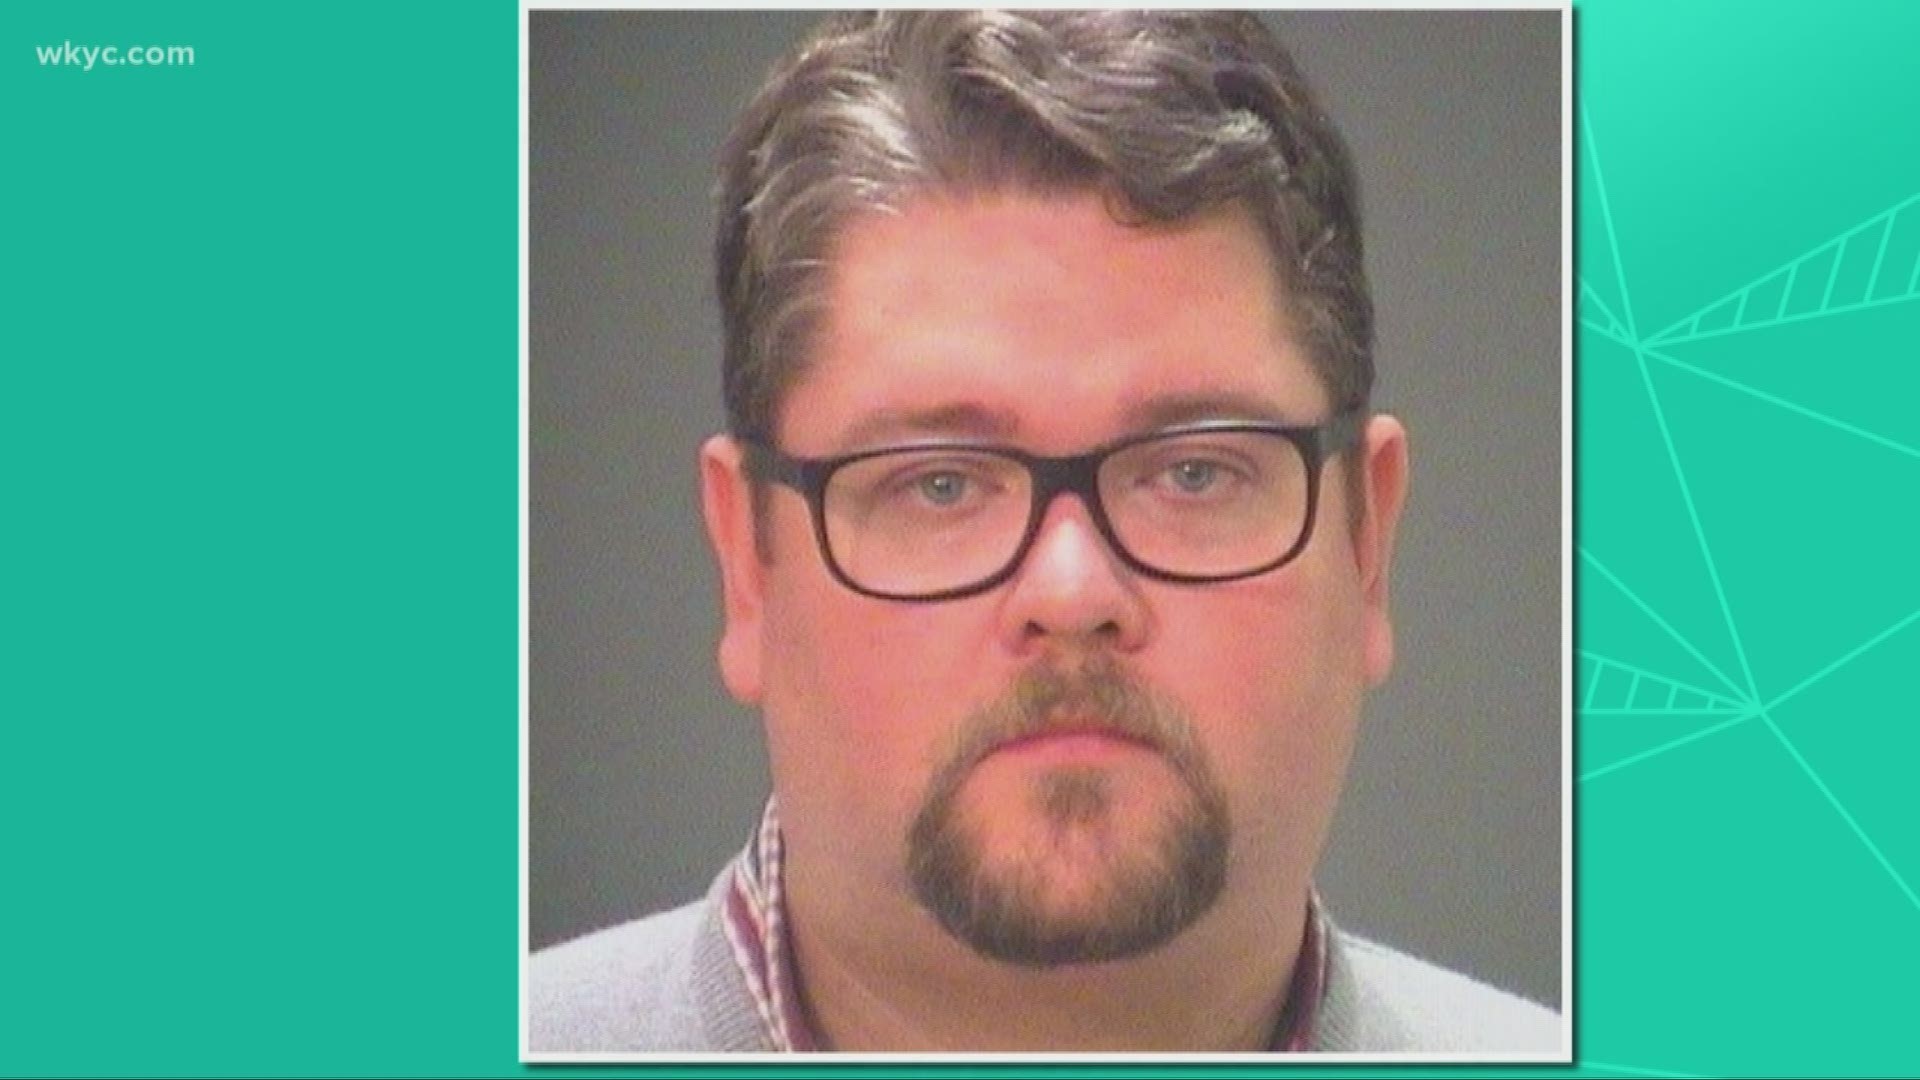 Agents with the Internet Crimes Against Children task force searched a Strongsville church Thursday before arresting a Catholic priest on child pornography charges.